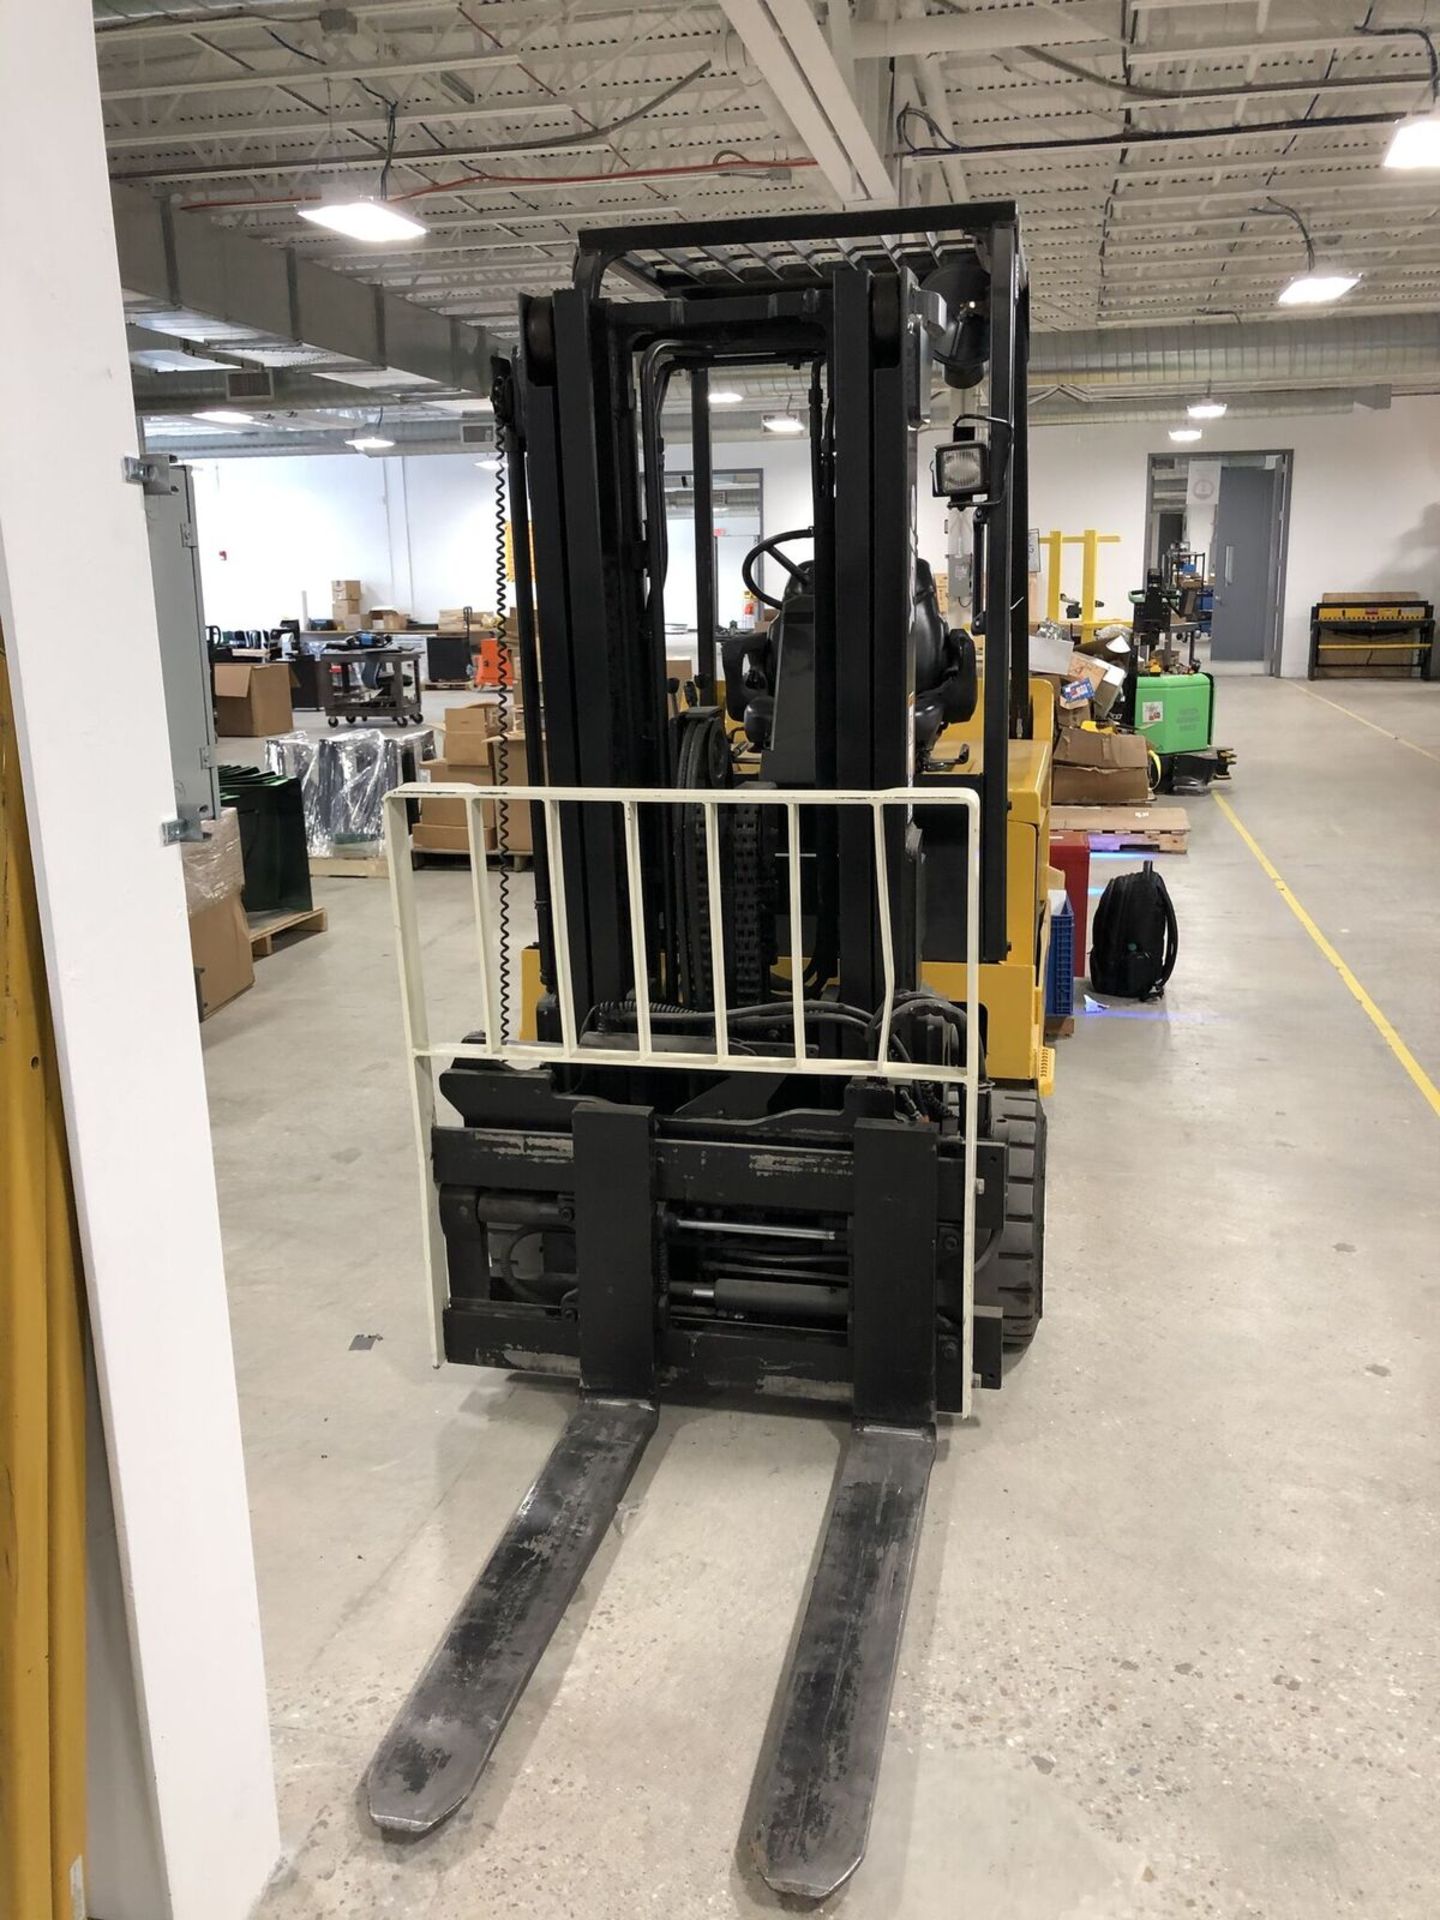 Yale Forklift, Model #ERC080HHN8OTF084, S/N #C839N0166E, Max Capacity 5500 Lbs Located in Boston MA - Image 2 of 5